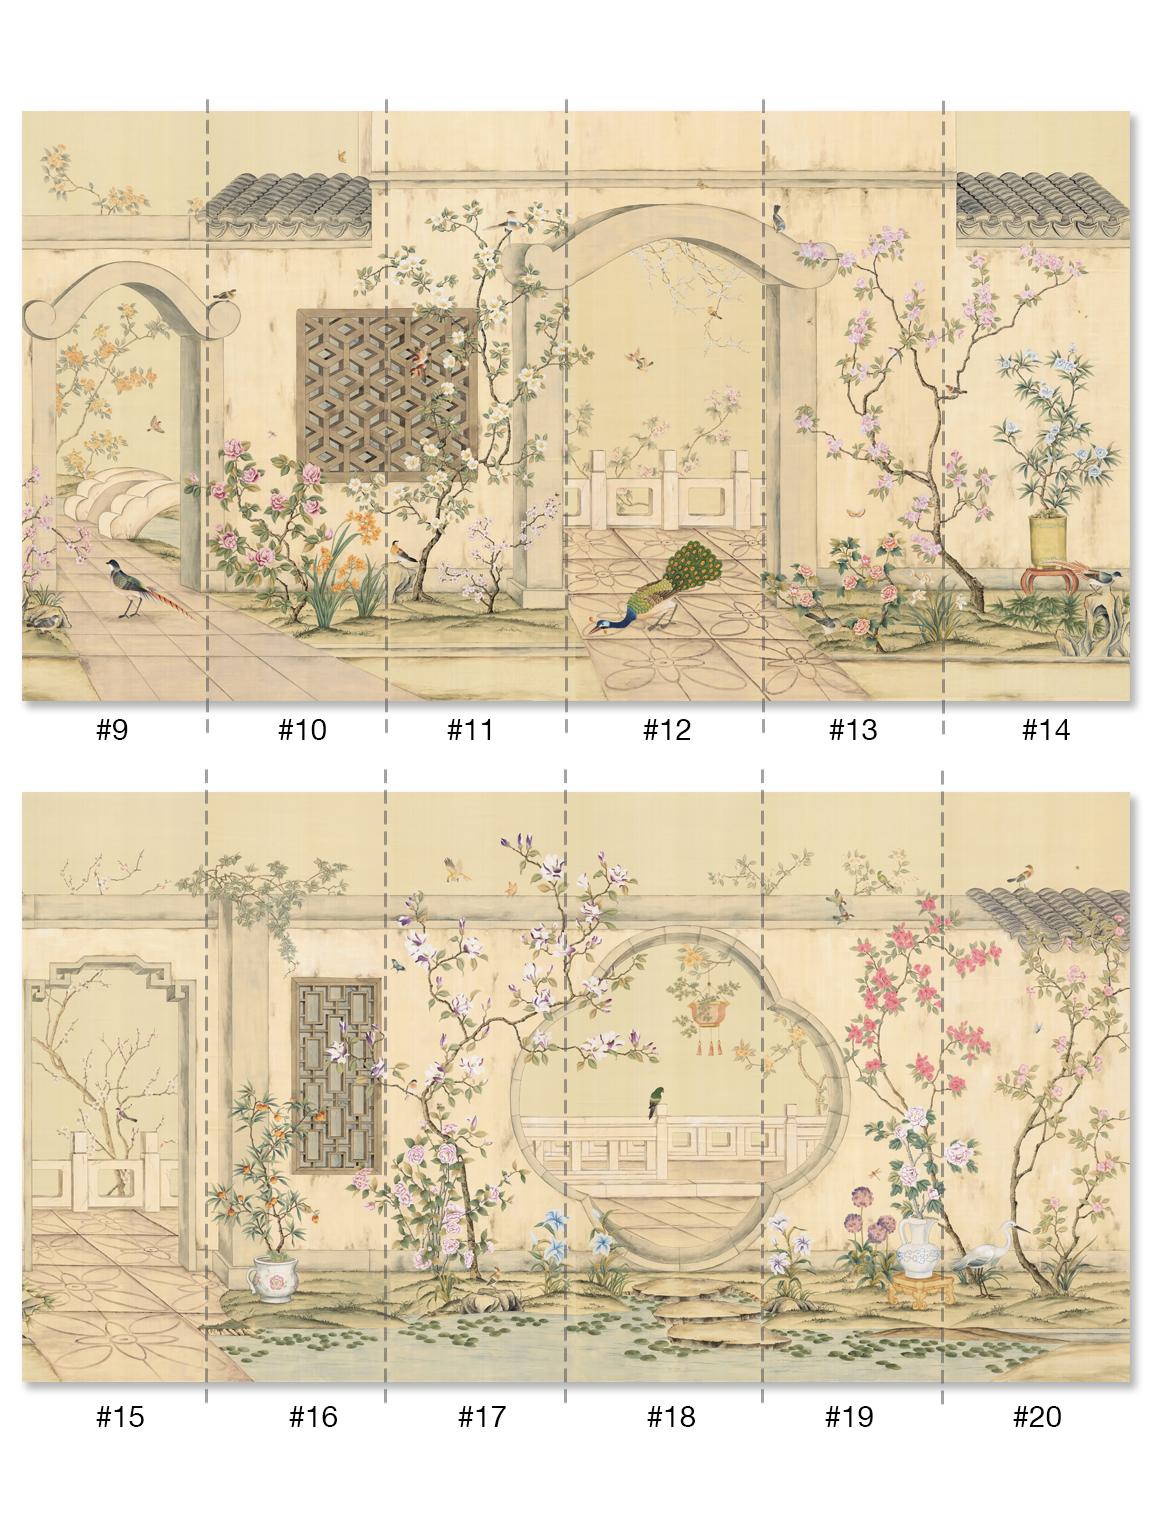 Emperor's Garden is an original full wall mural made of multiple panels. This set of 12 consecutive panels is hand painted on silk paper in the traditional chinoiserie technique. Arches and windows create framing elements for flowering trees and